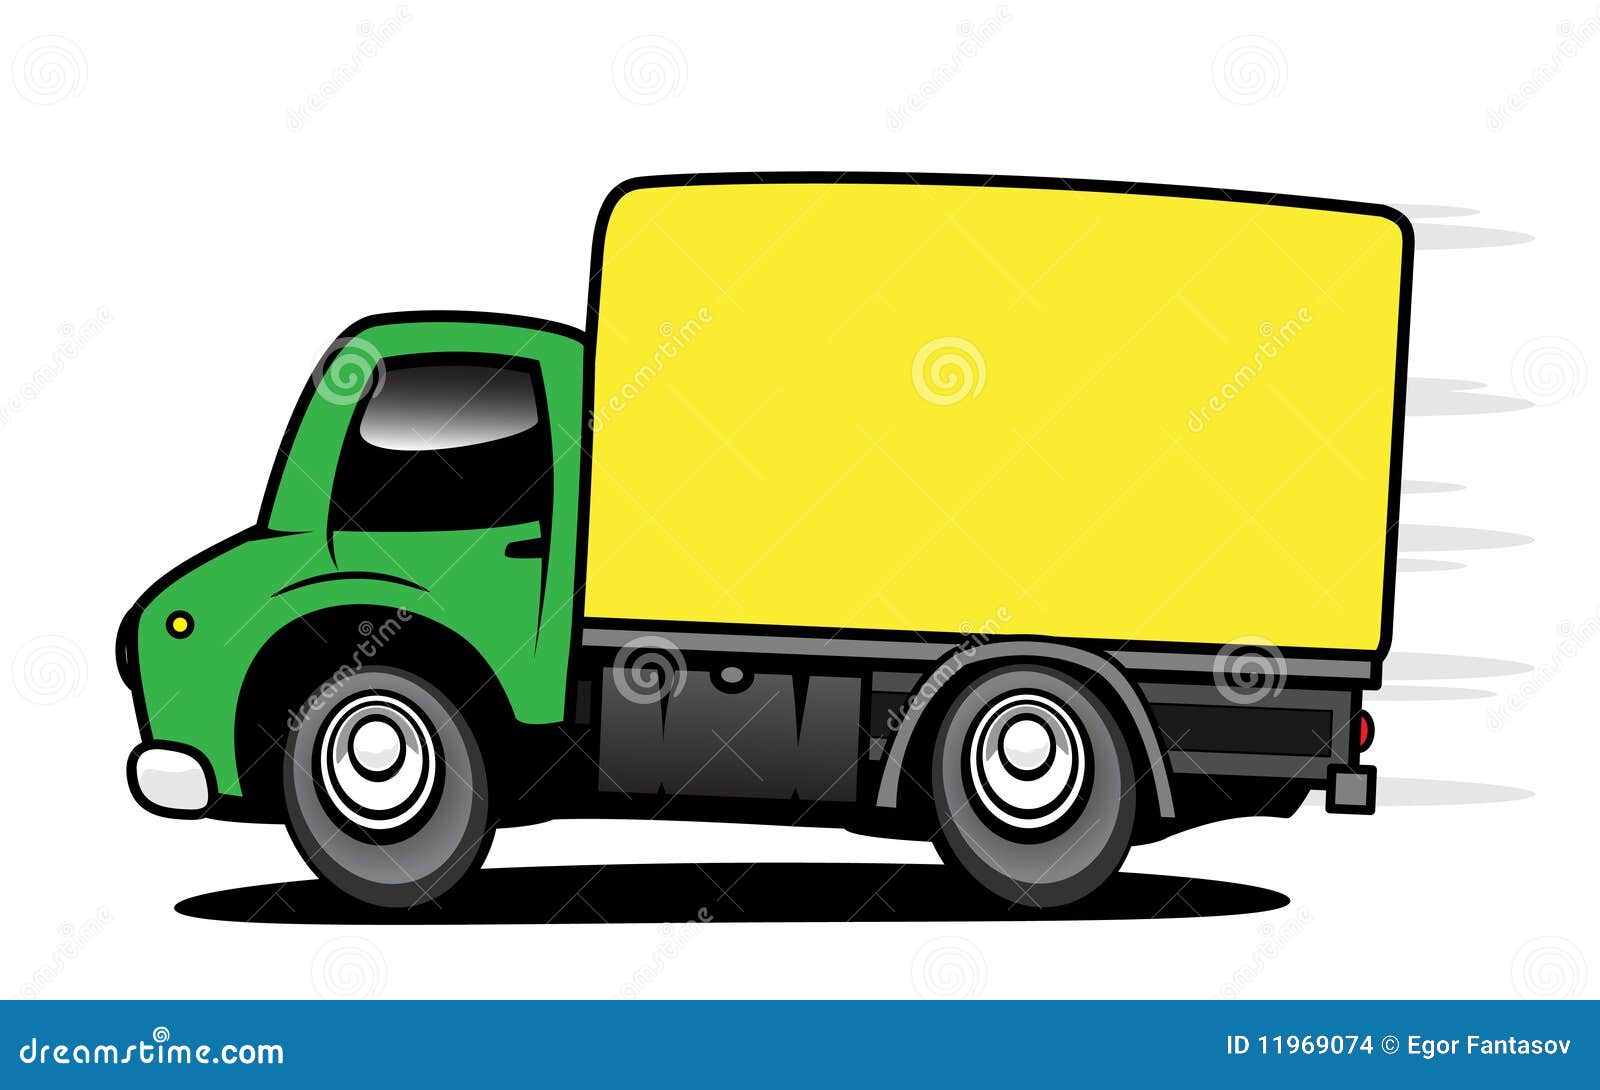 delivery truck clipart - photo #13